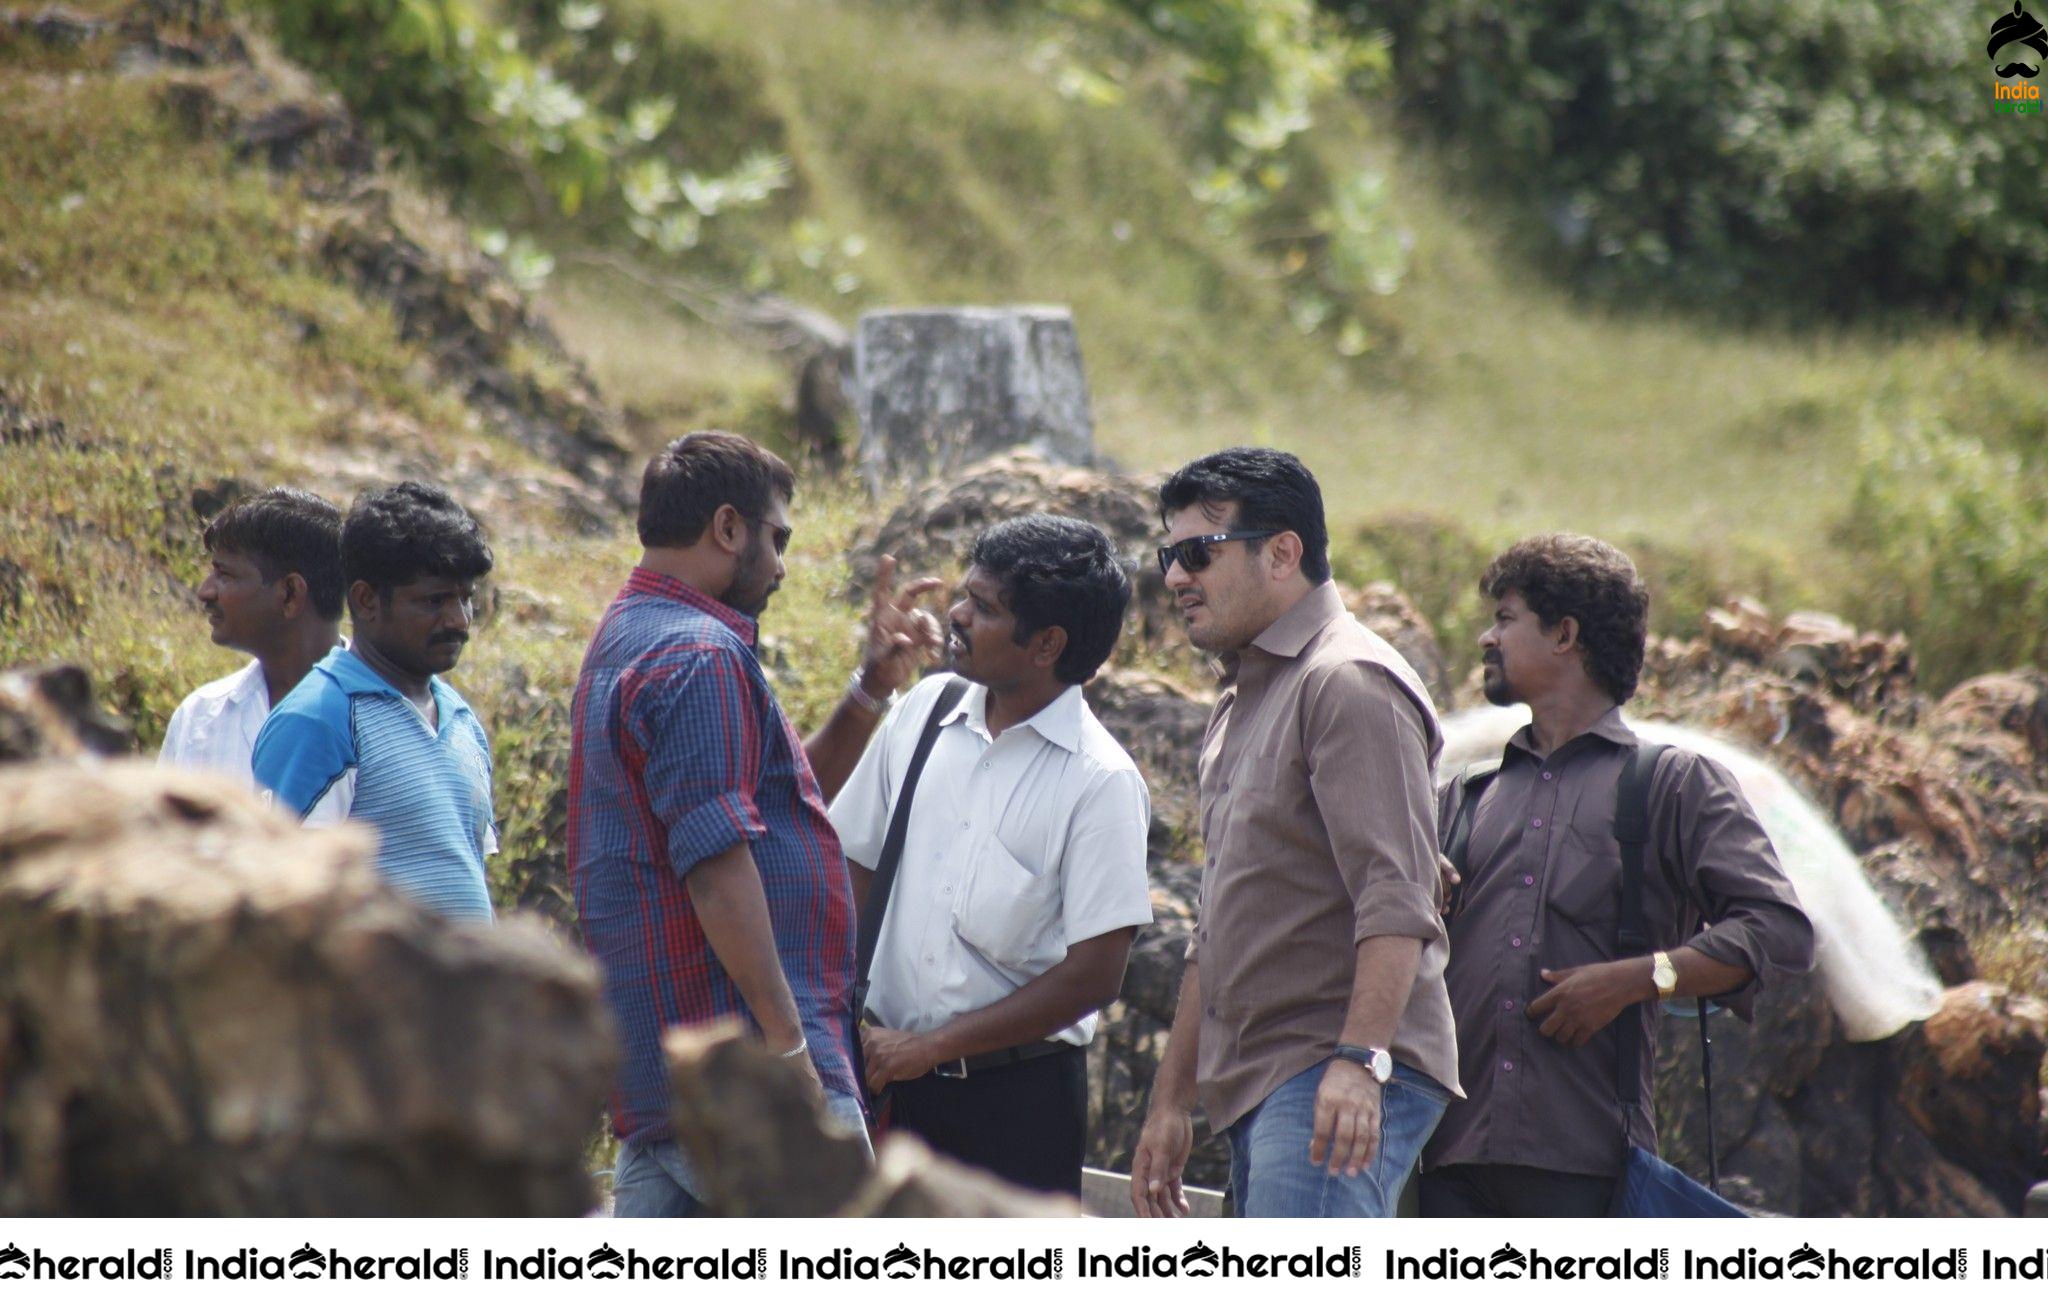 INDIA HERALD EXCLUSIVE Actor Ajith Unseen Stylish Photoshoot Stills as a Don Set 1